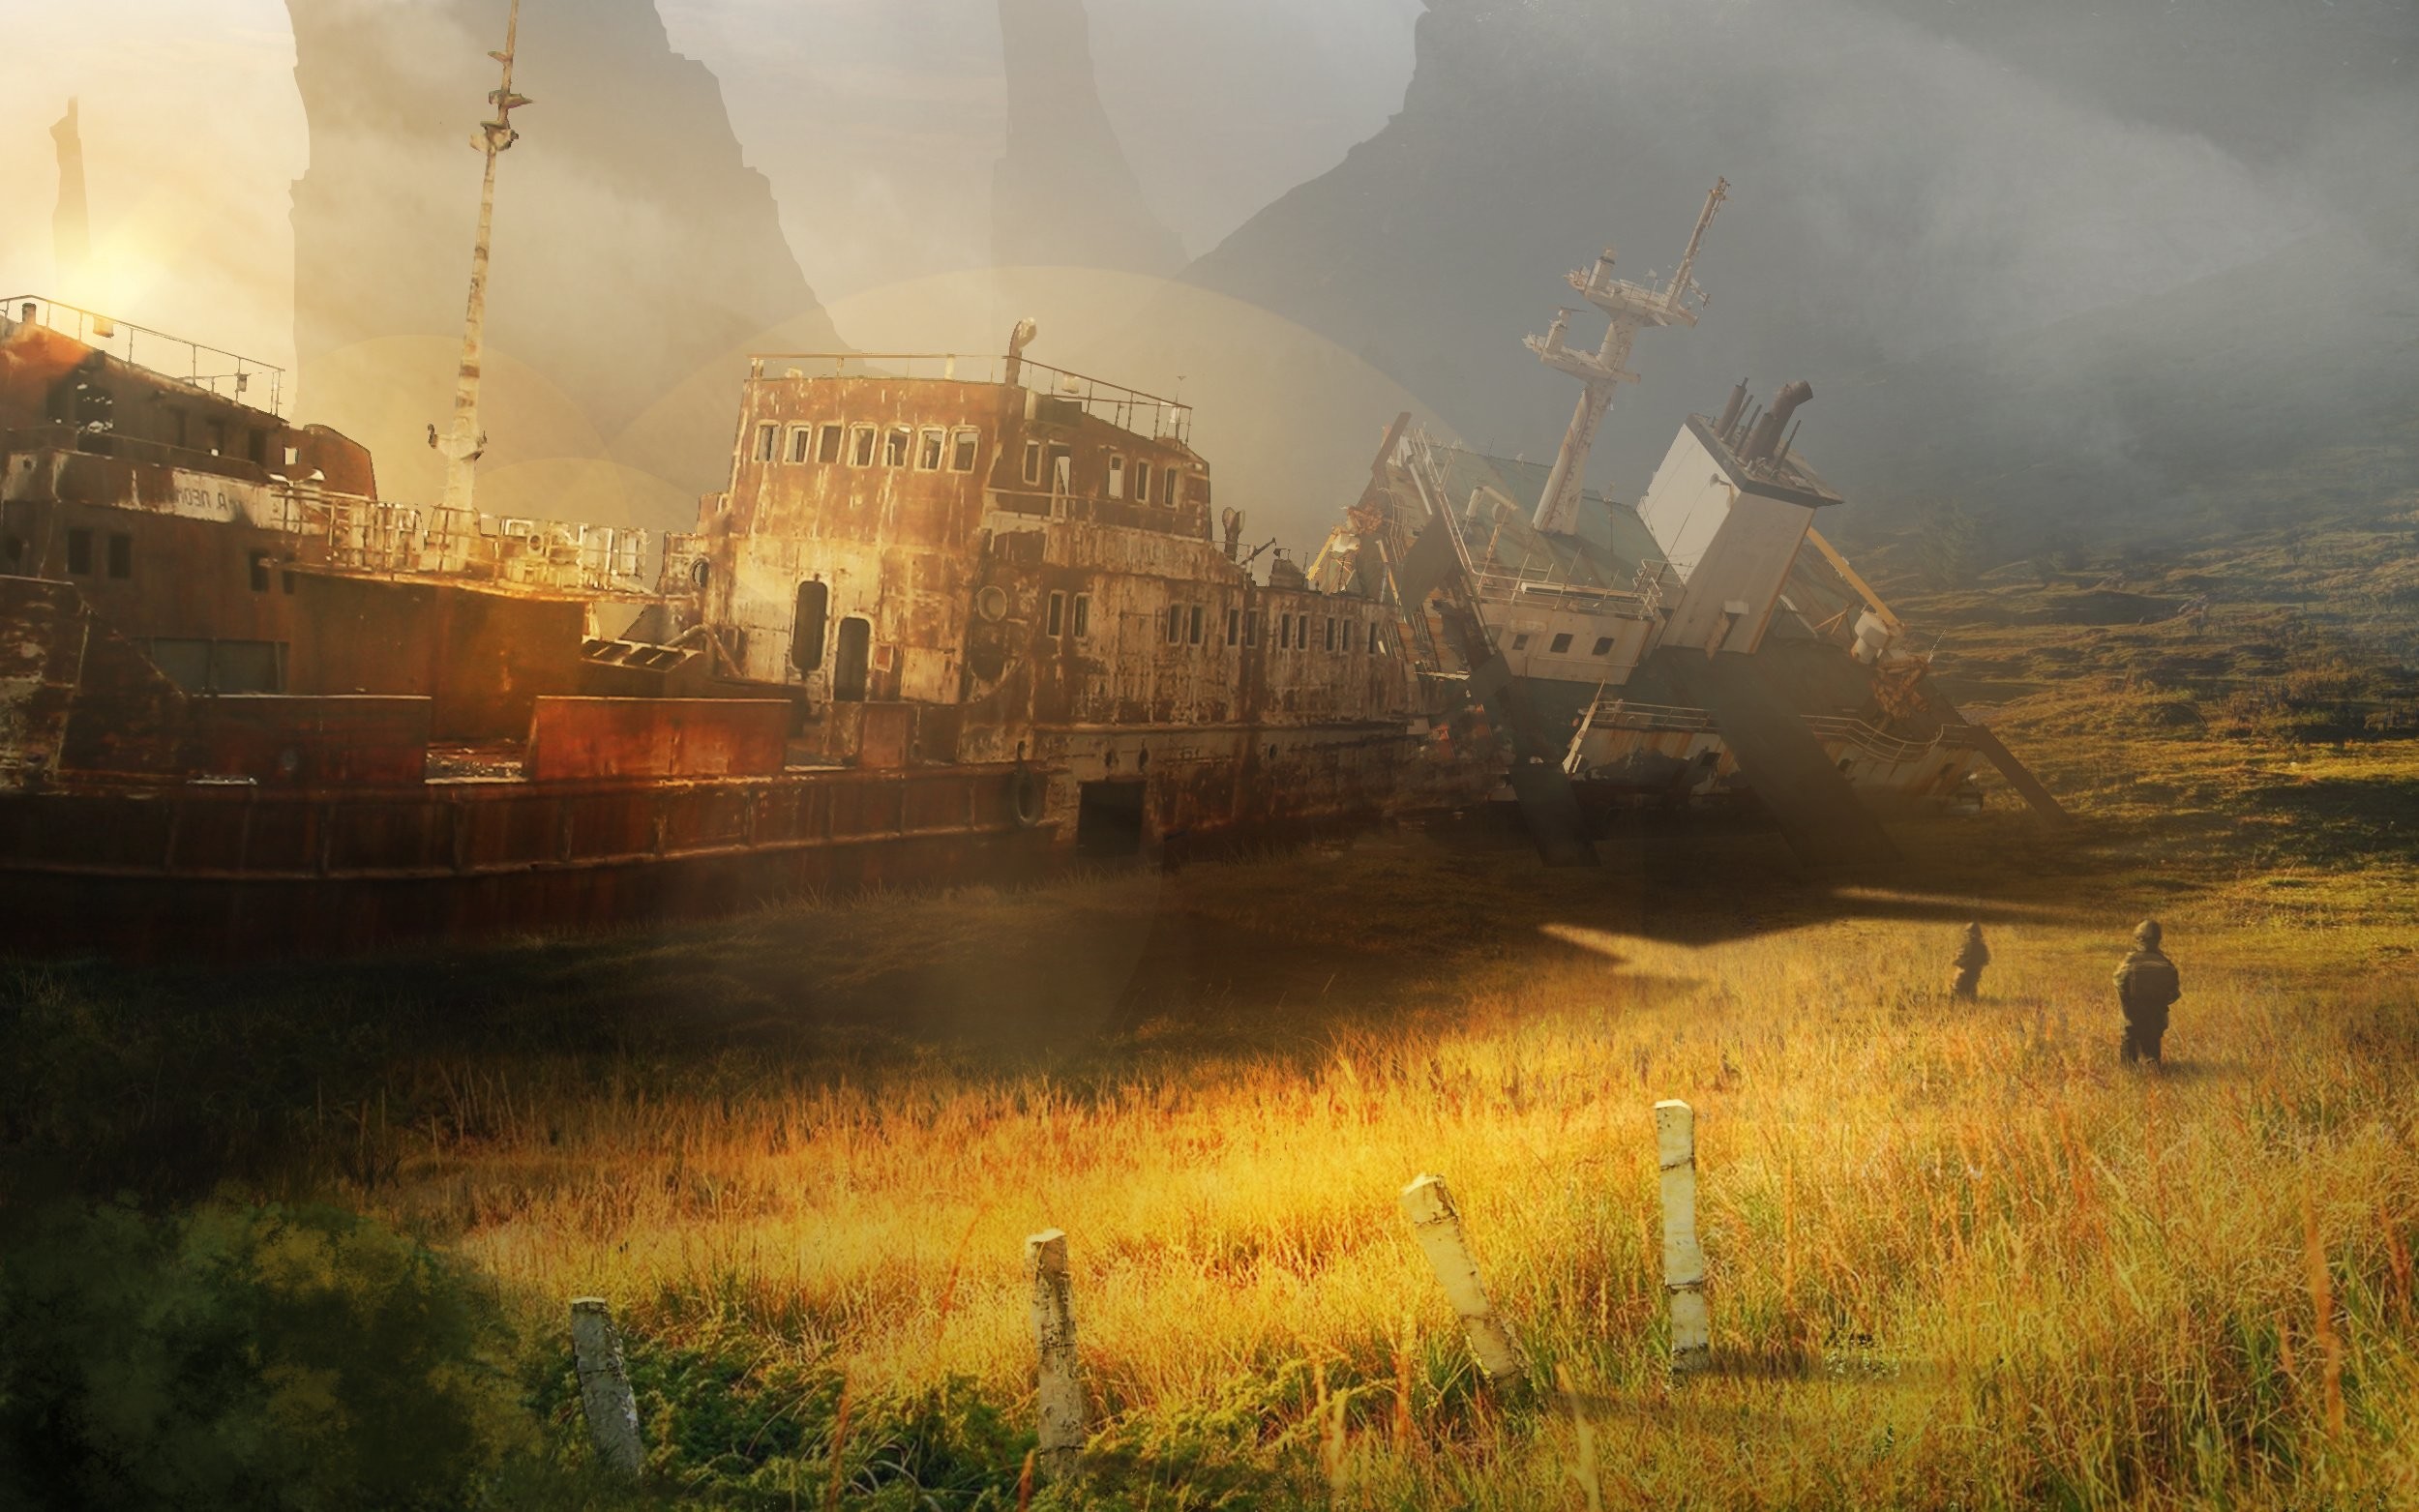 2500x1563 Stalker ship wasteland sci-fi apocalyptic boat wallpaper |  |  247242 | WallpaperUP